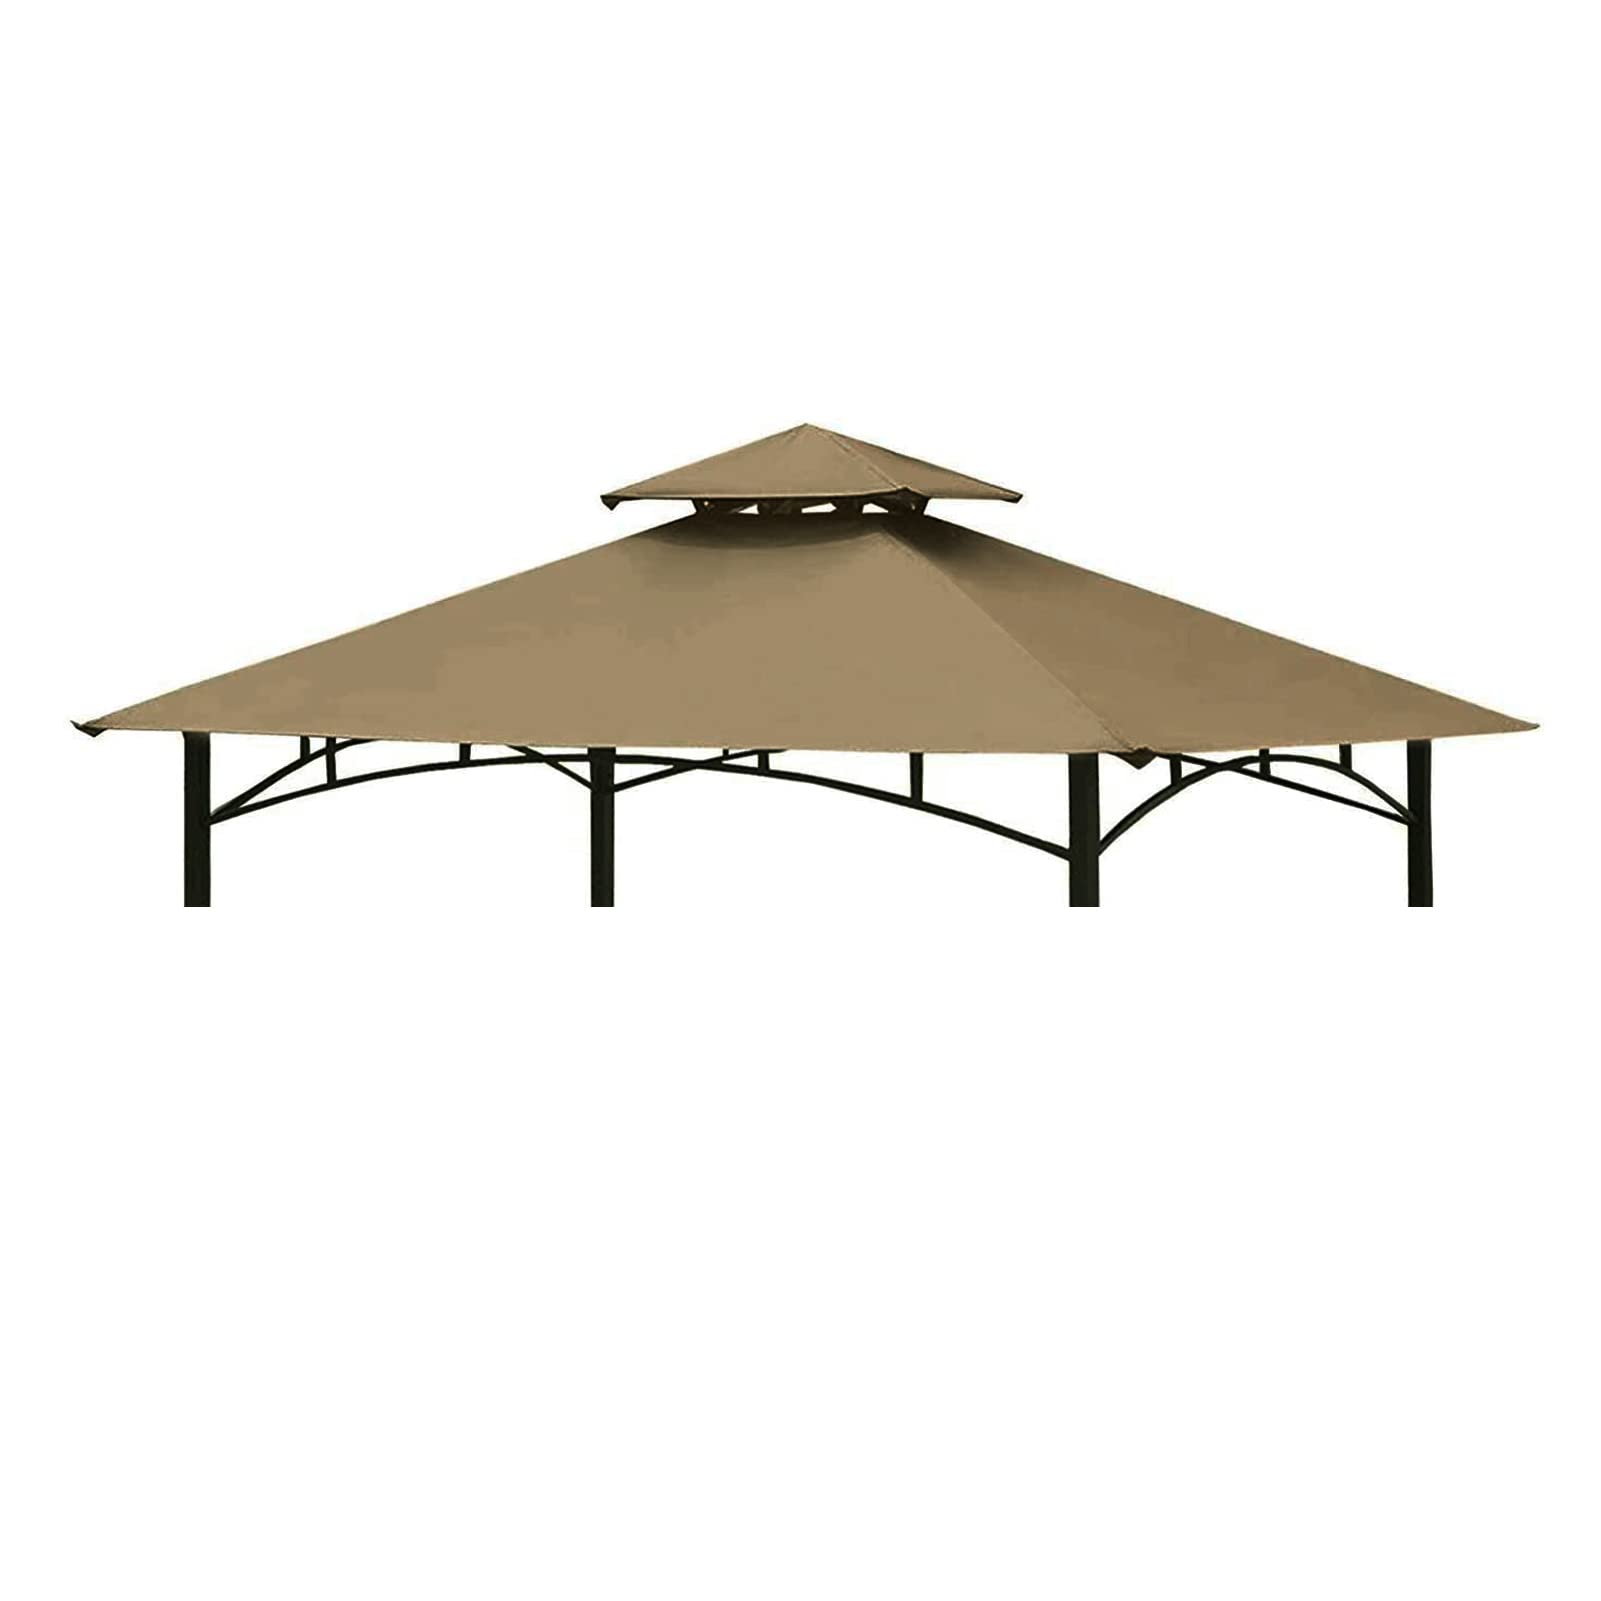 Tanxianzhe Gazebo Replacement Privacy Curtain 10' x 10'+Tanxianzhe 5FT x 8FT Grill Gazebo Shelter Replacement Canopy Cover Double Tiered BBQ Roof Top